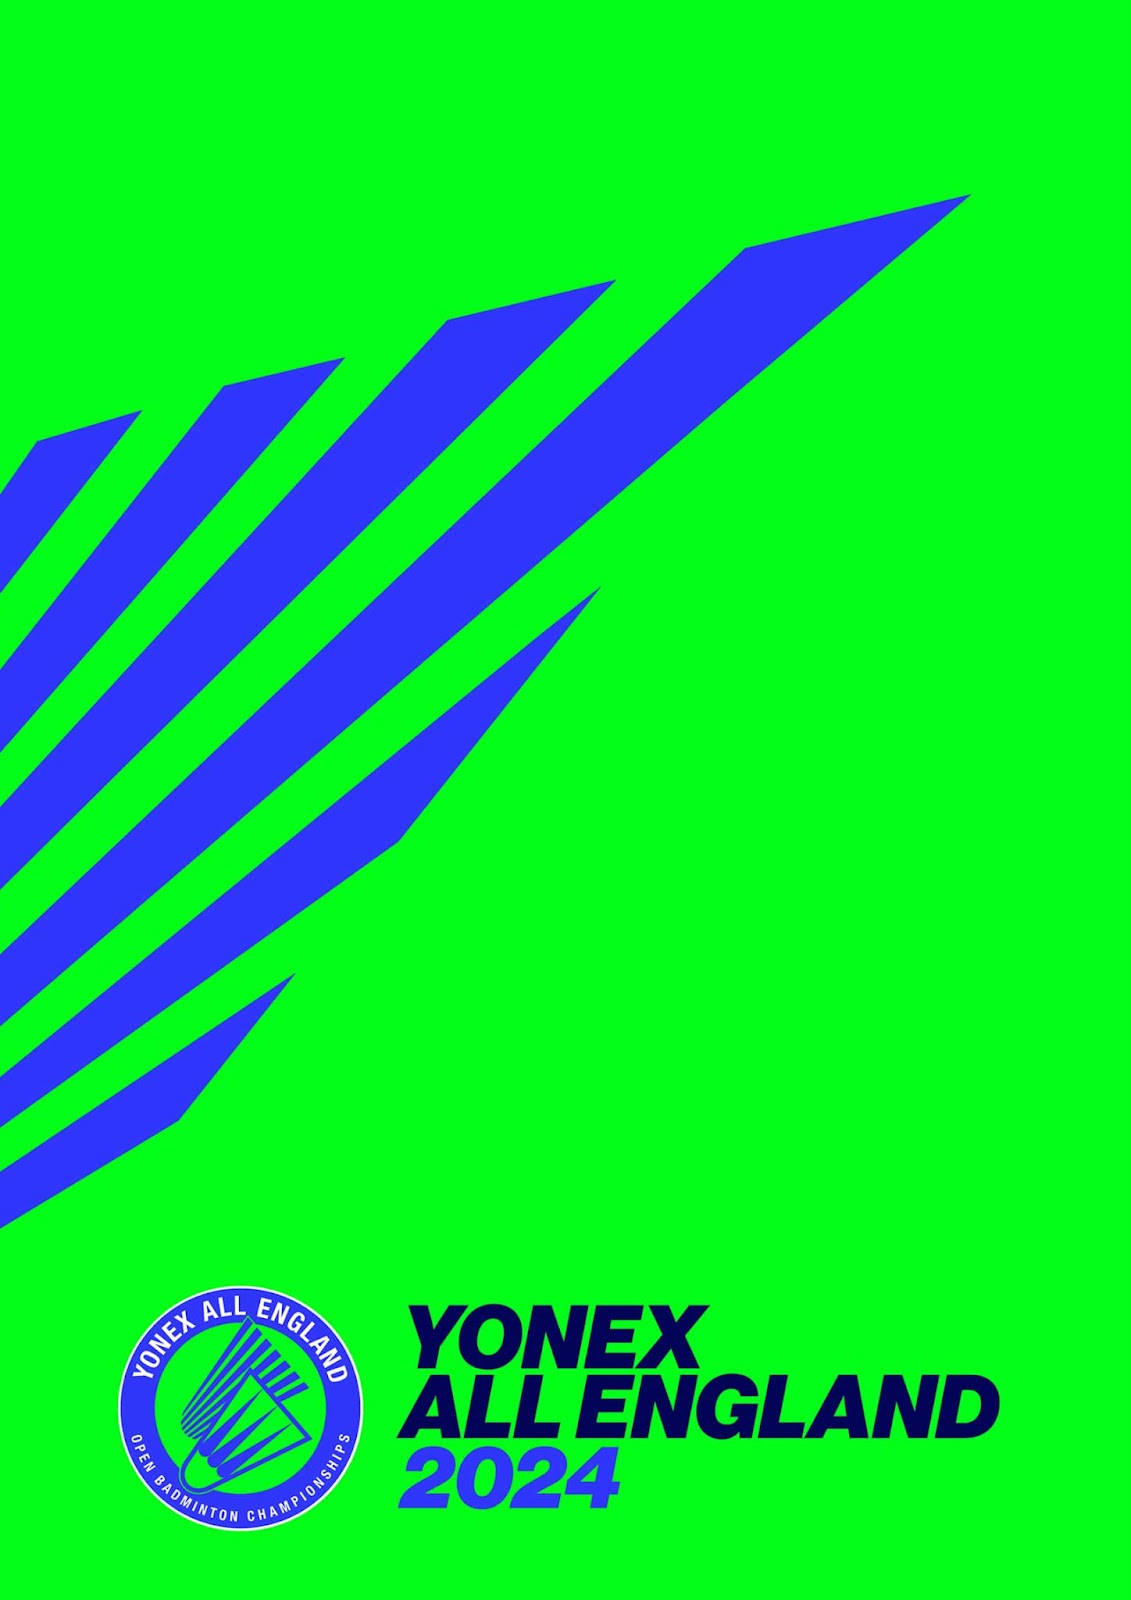 Branding and visual identity artifact from Revitalizing a Timeless Championship: YONEX All England’s Brand Transformation article